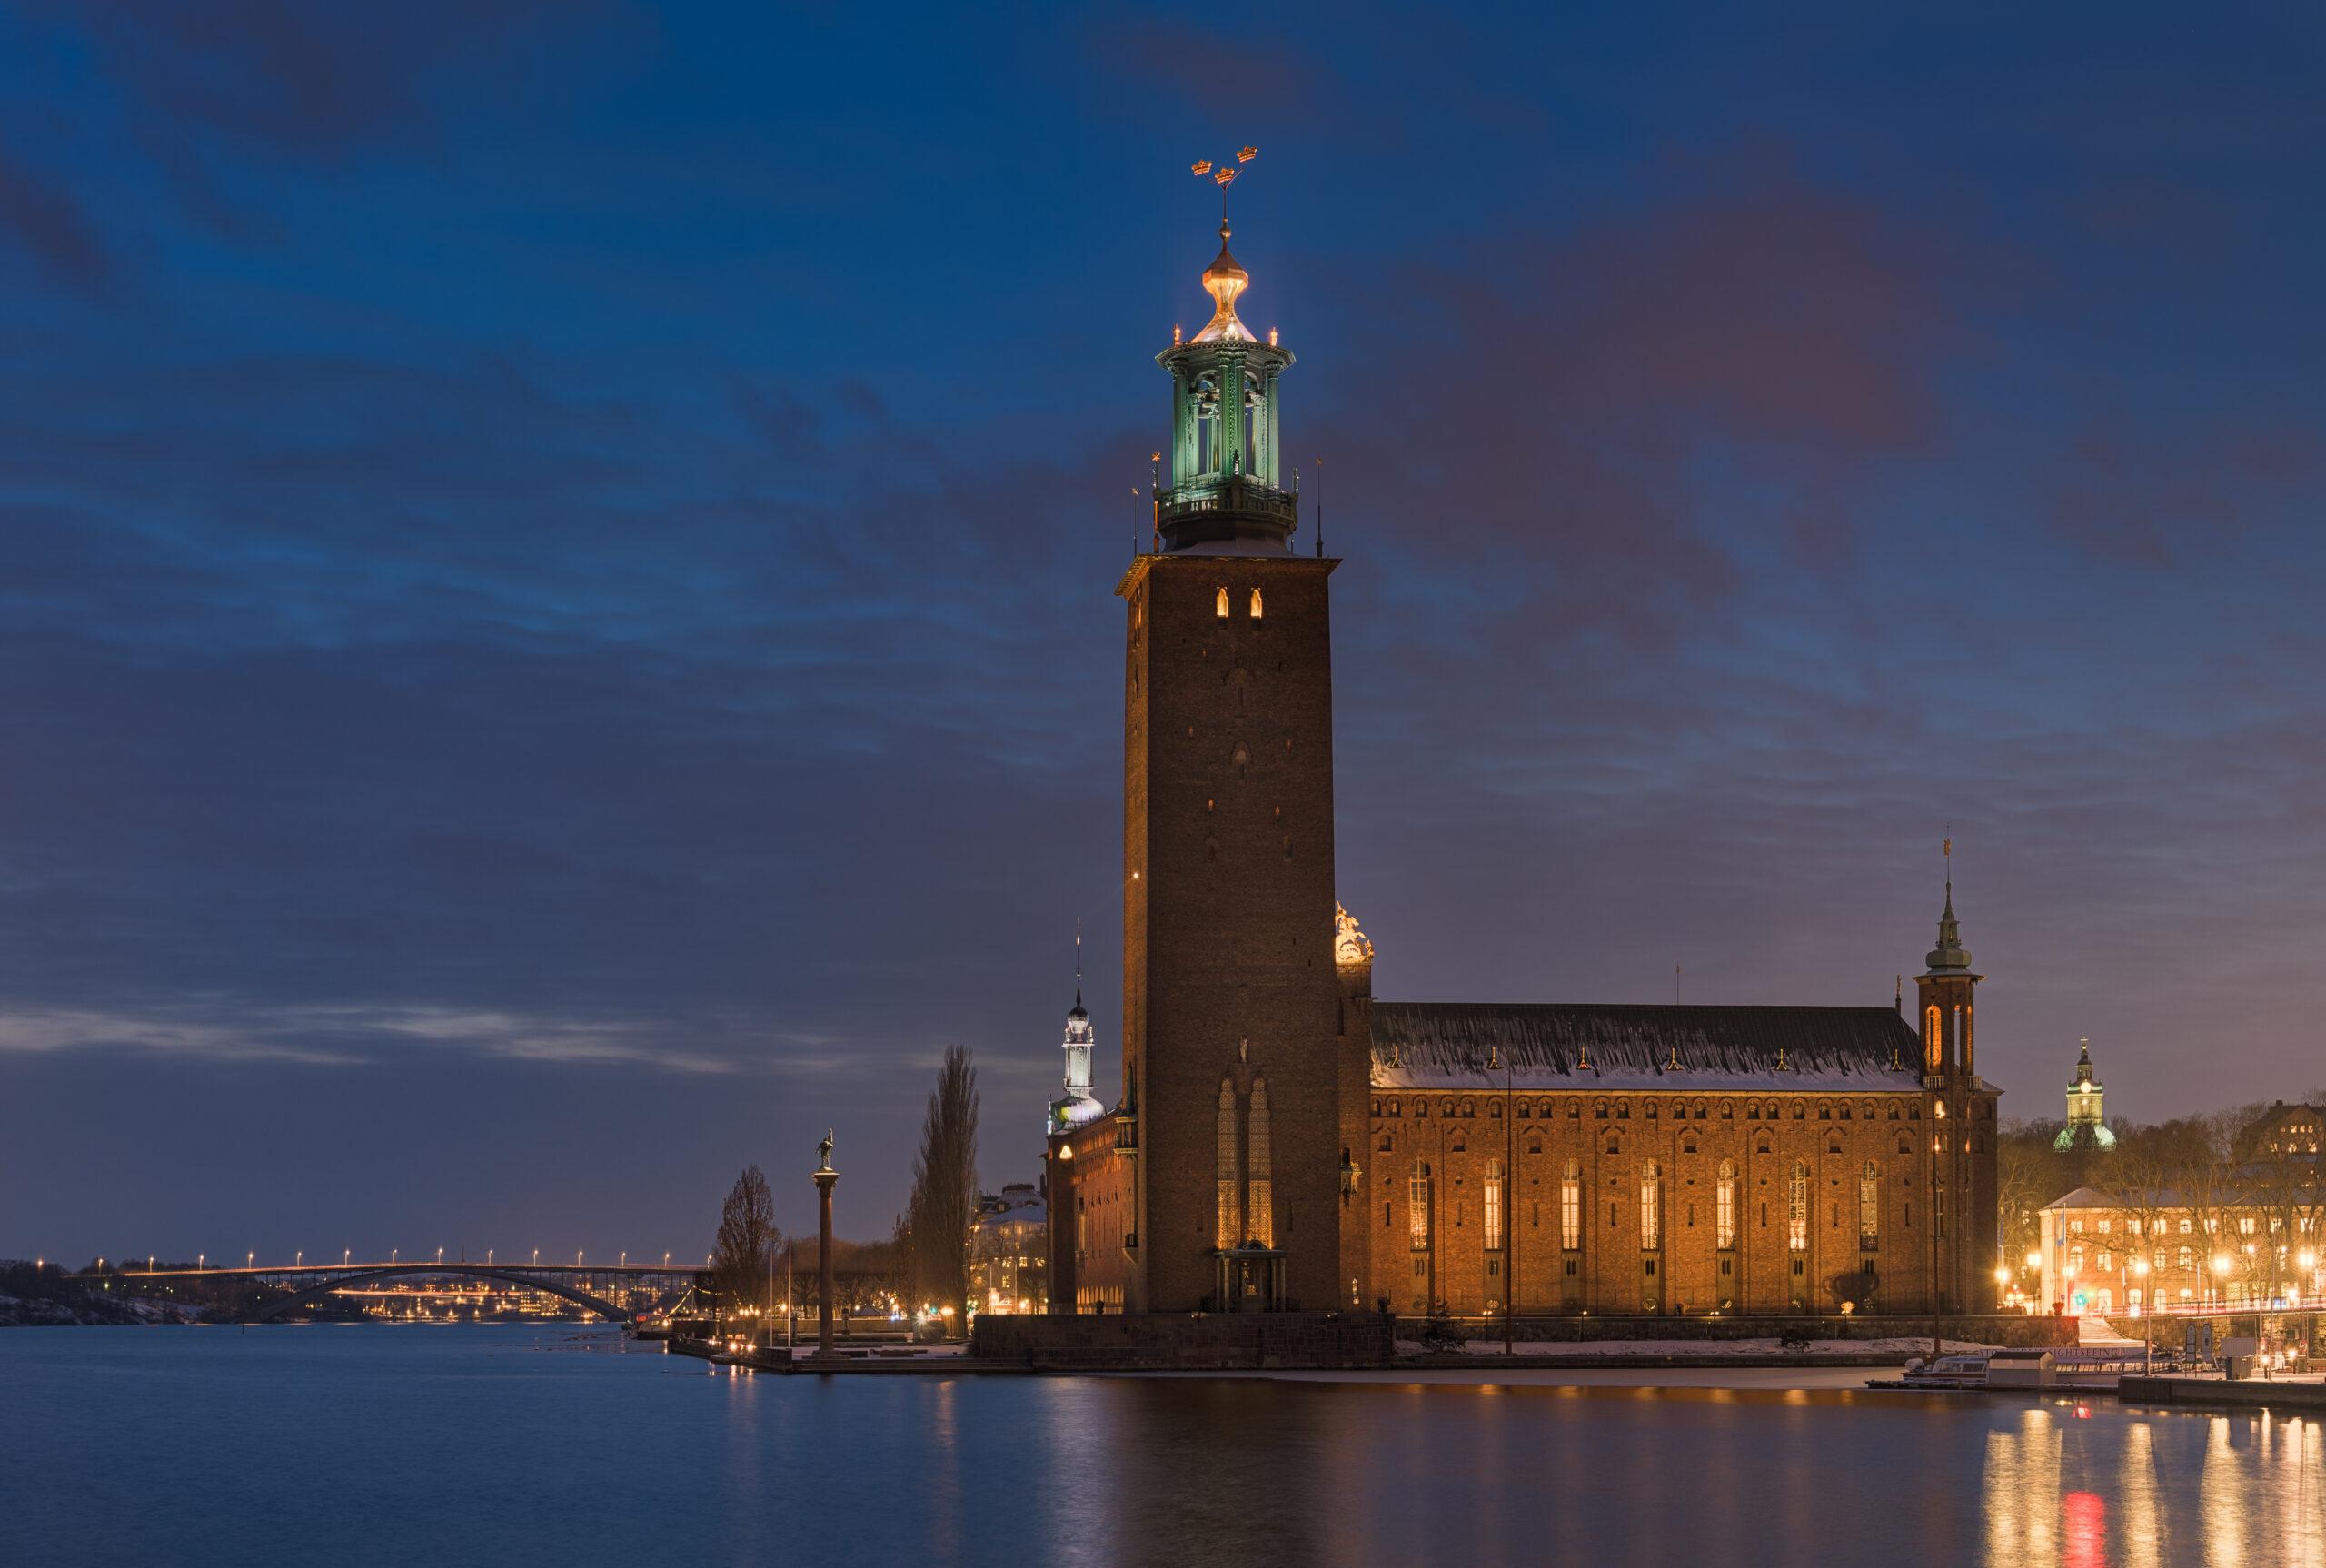 The Stockholm City Hall: places to visit in Stockholm